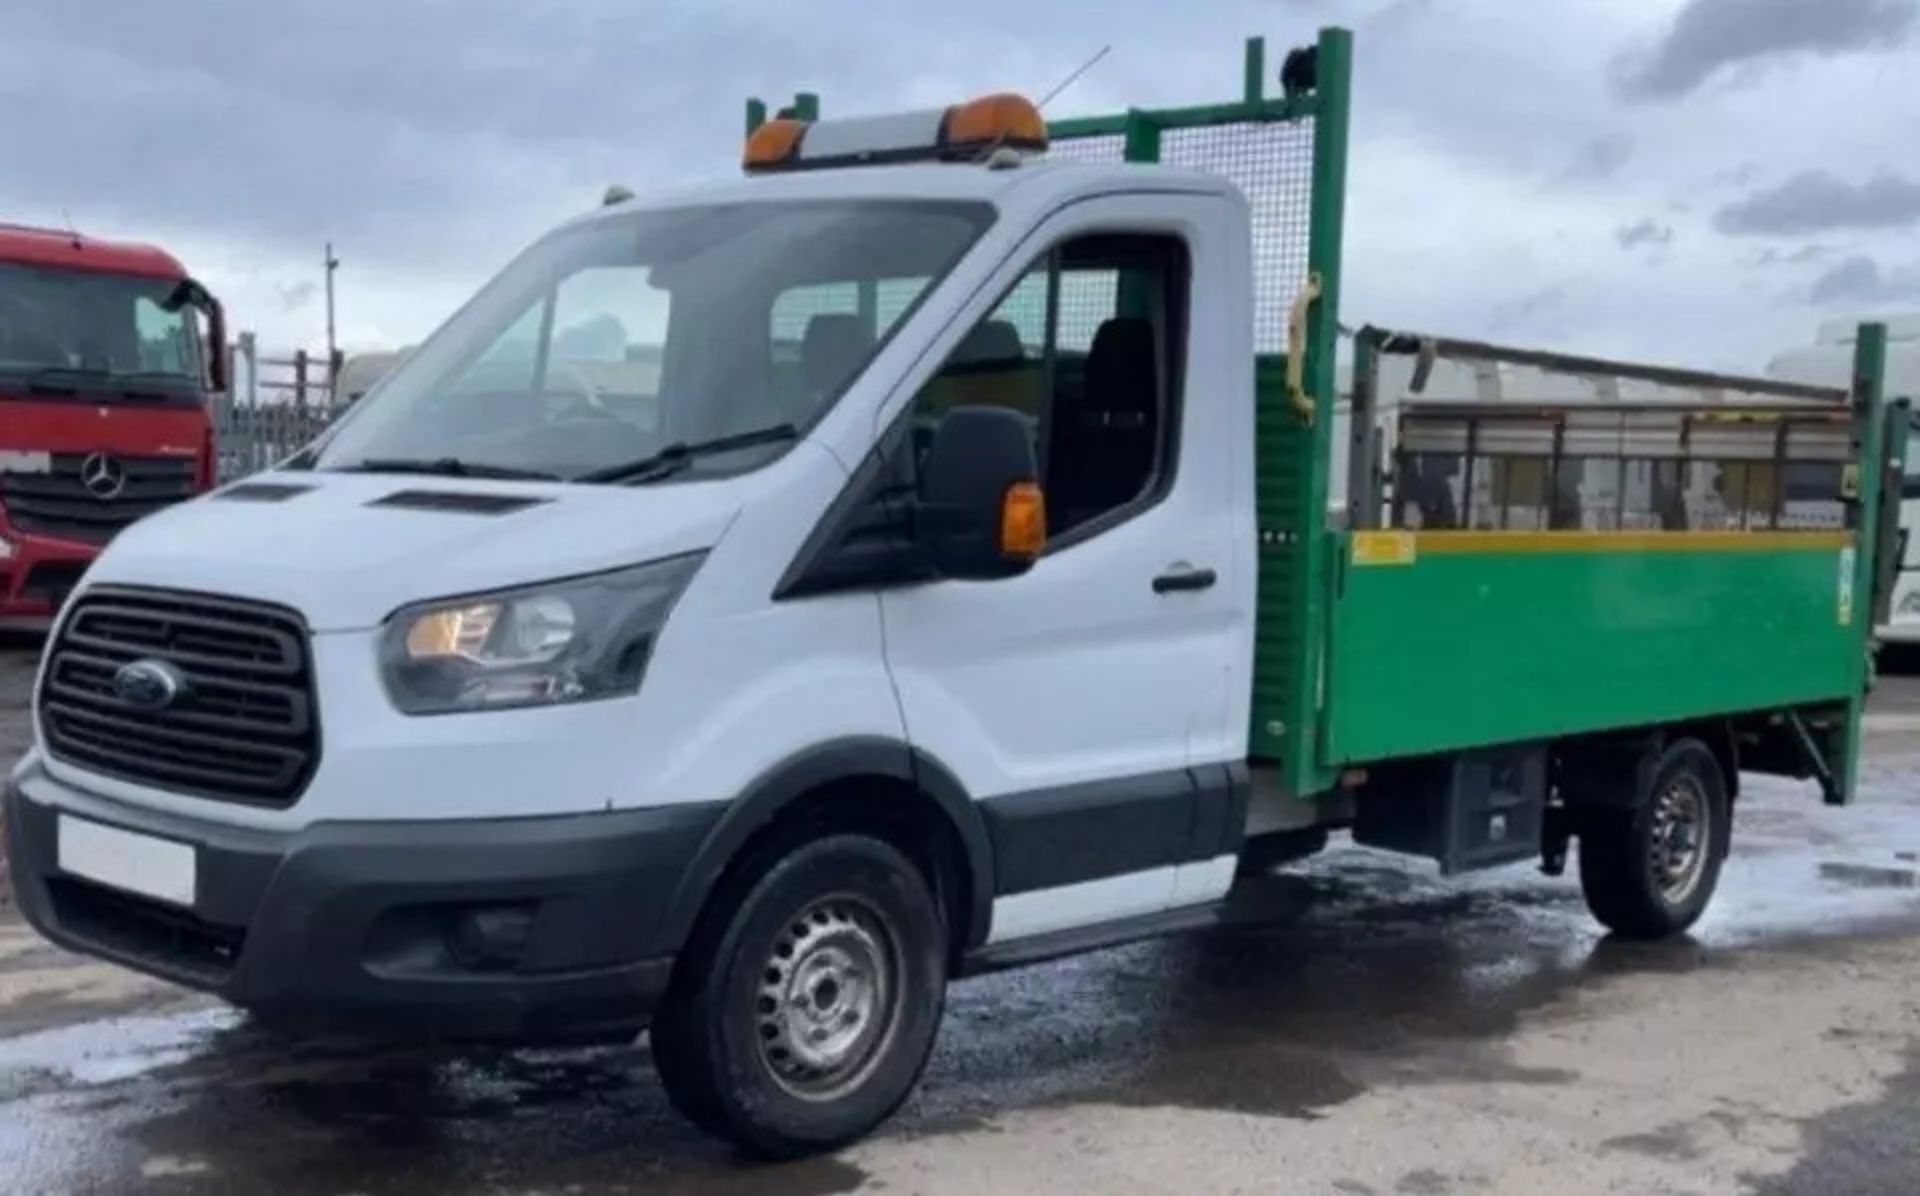 2019 FORD TRANSIT T350 LWB DROPSIDE TRUCK - VERSATILE, RELIABLE, AND READY FOR HEAVY DUTY - Image 2 of 16